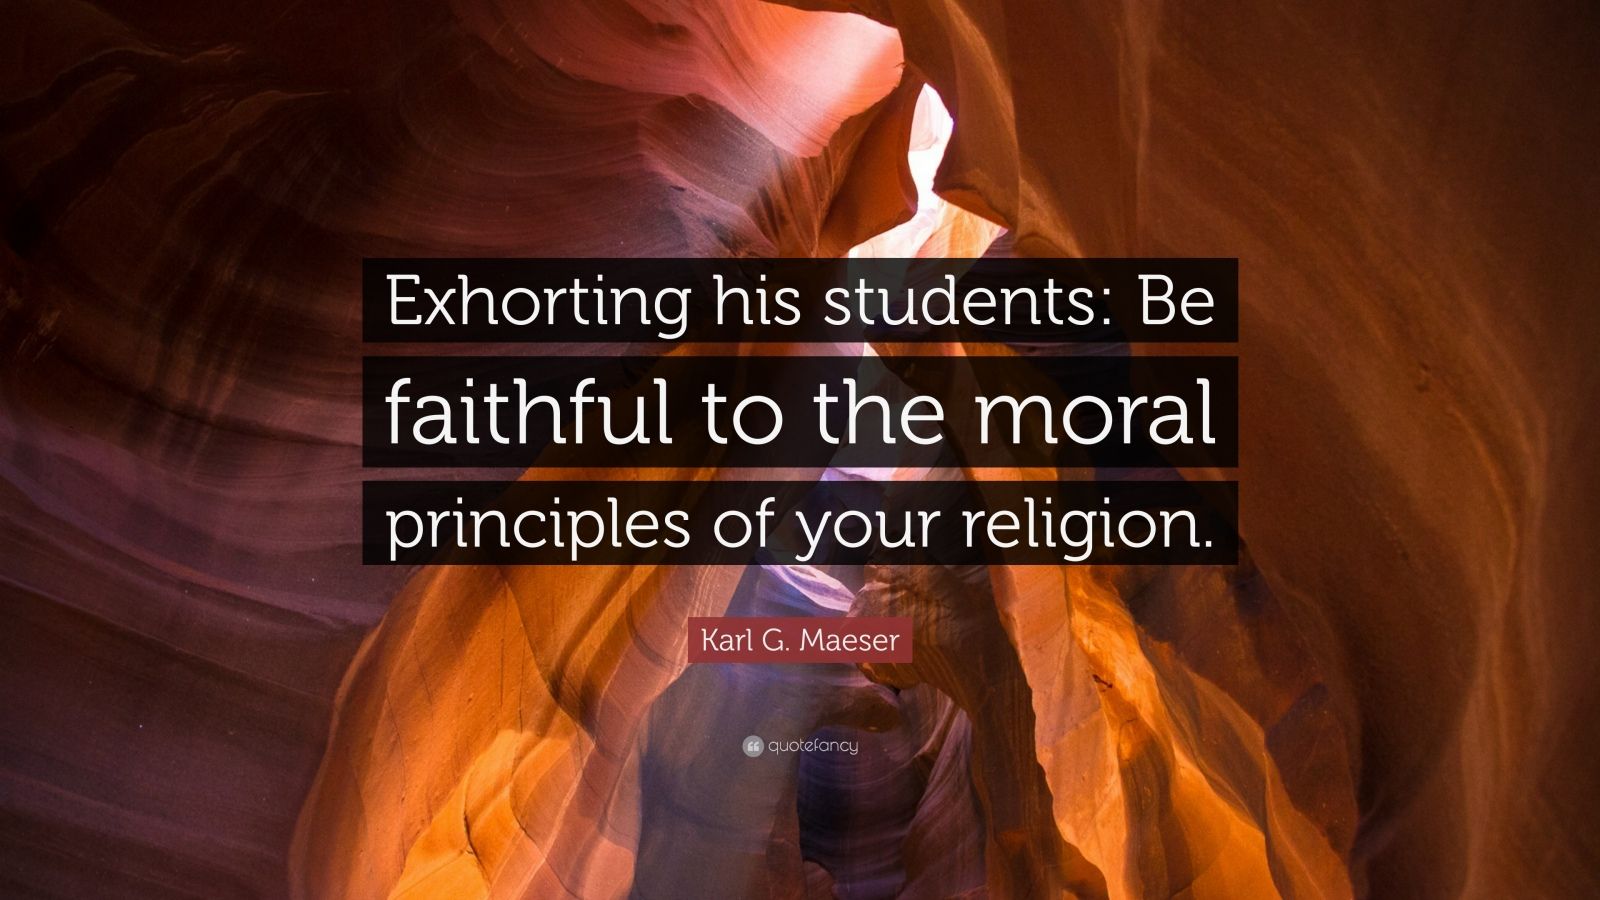 Karl G. Maeser Quote: “Exhorting his students: Be faithful to the moral